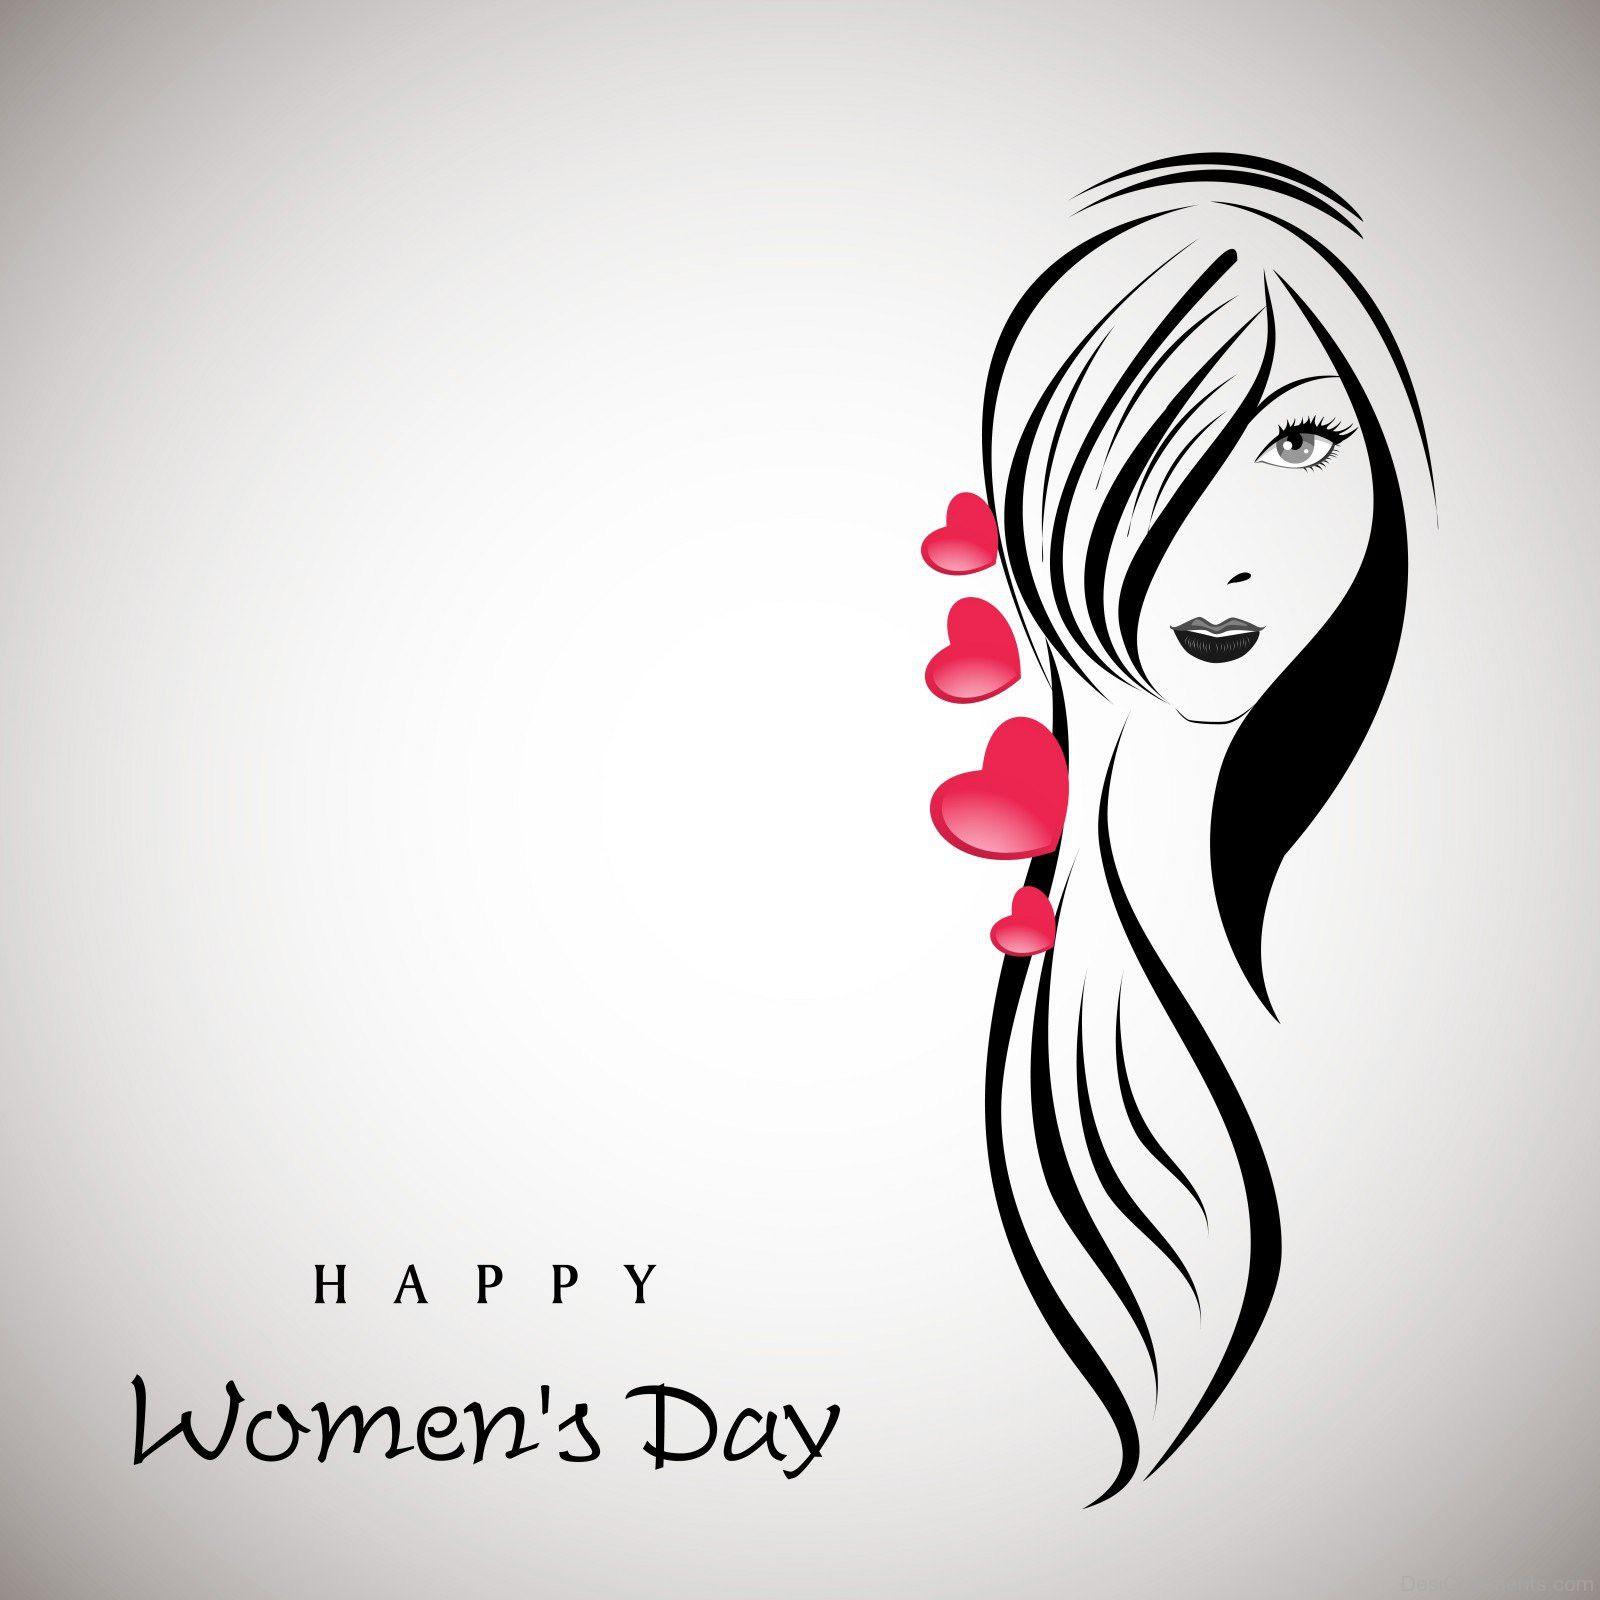 Women’s Day Wallpapers